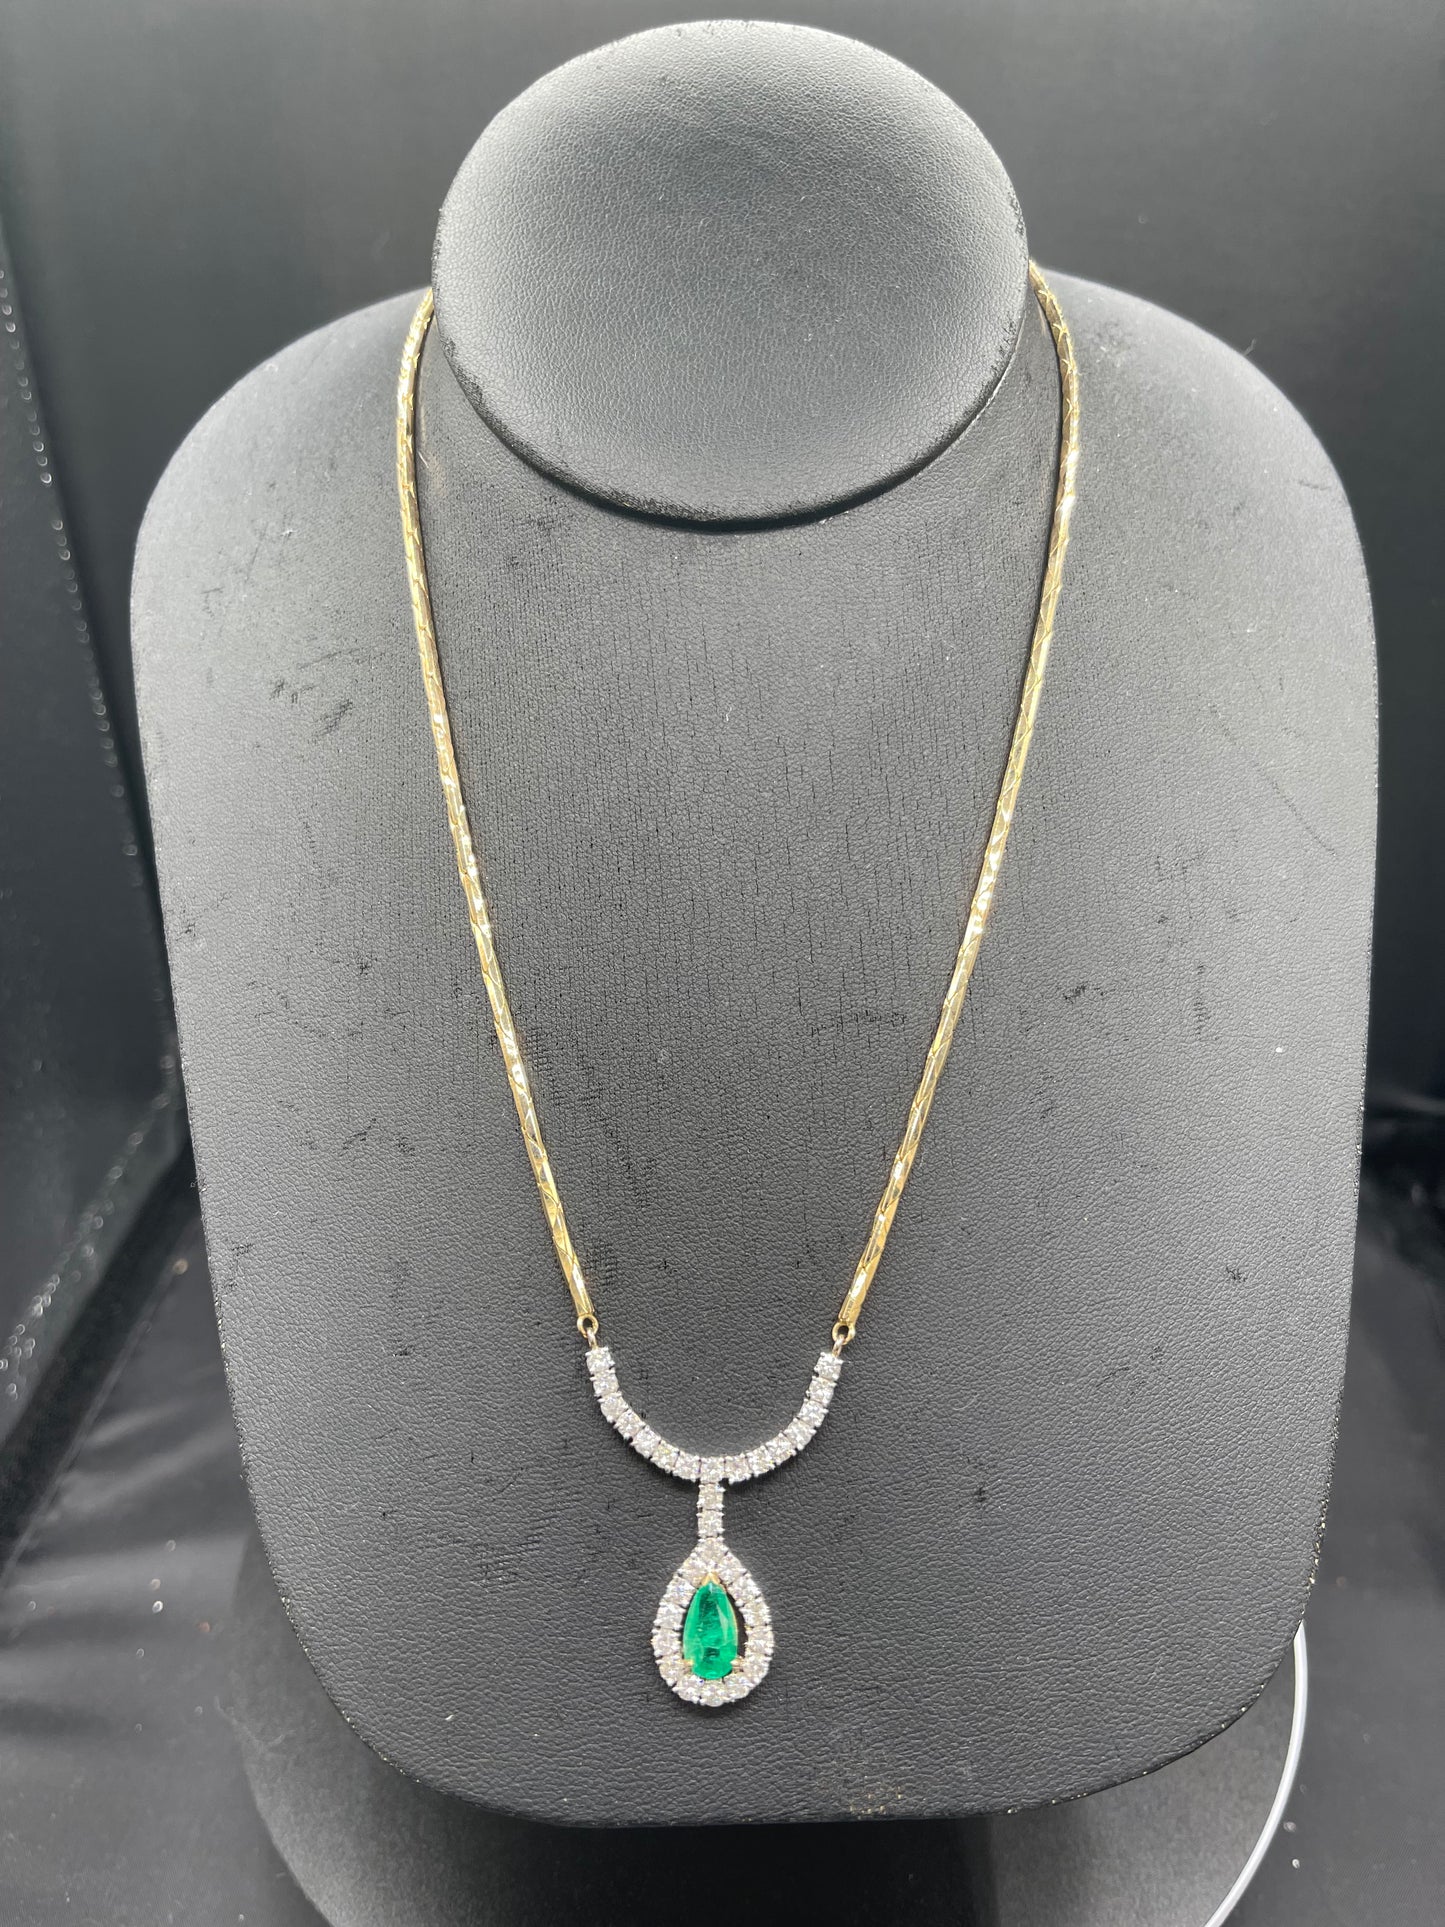 4.25 Carat Natural Colombian Emerald & Diamond 14k Gold Necklace